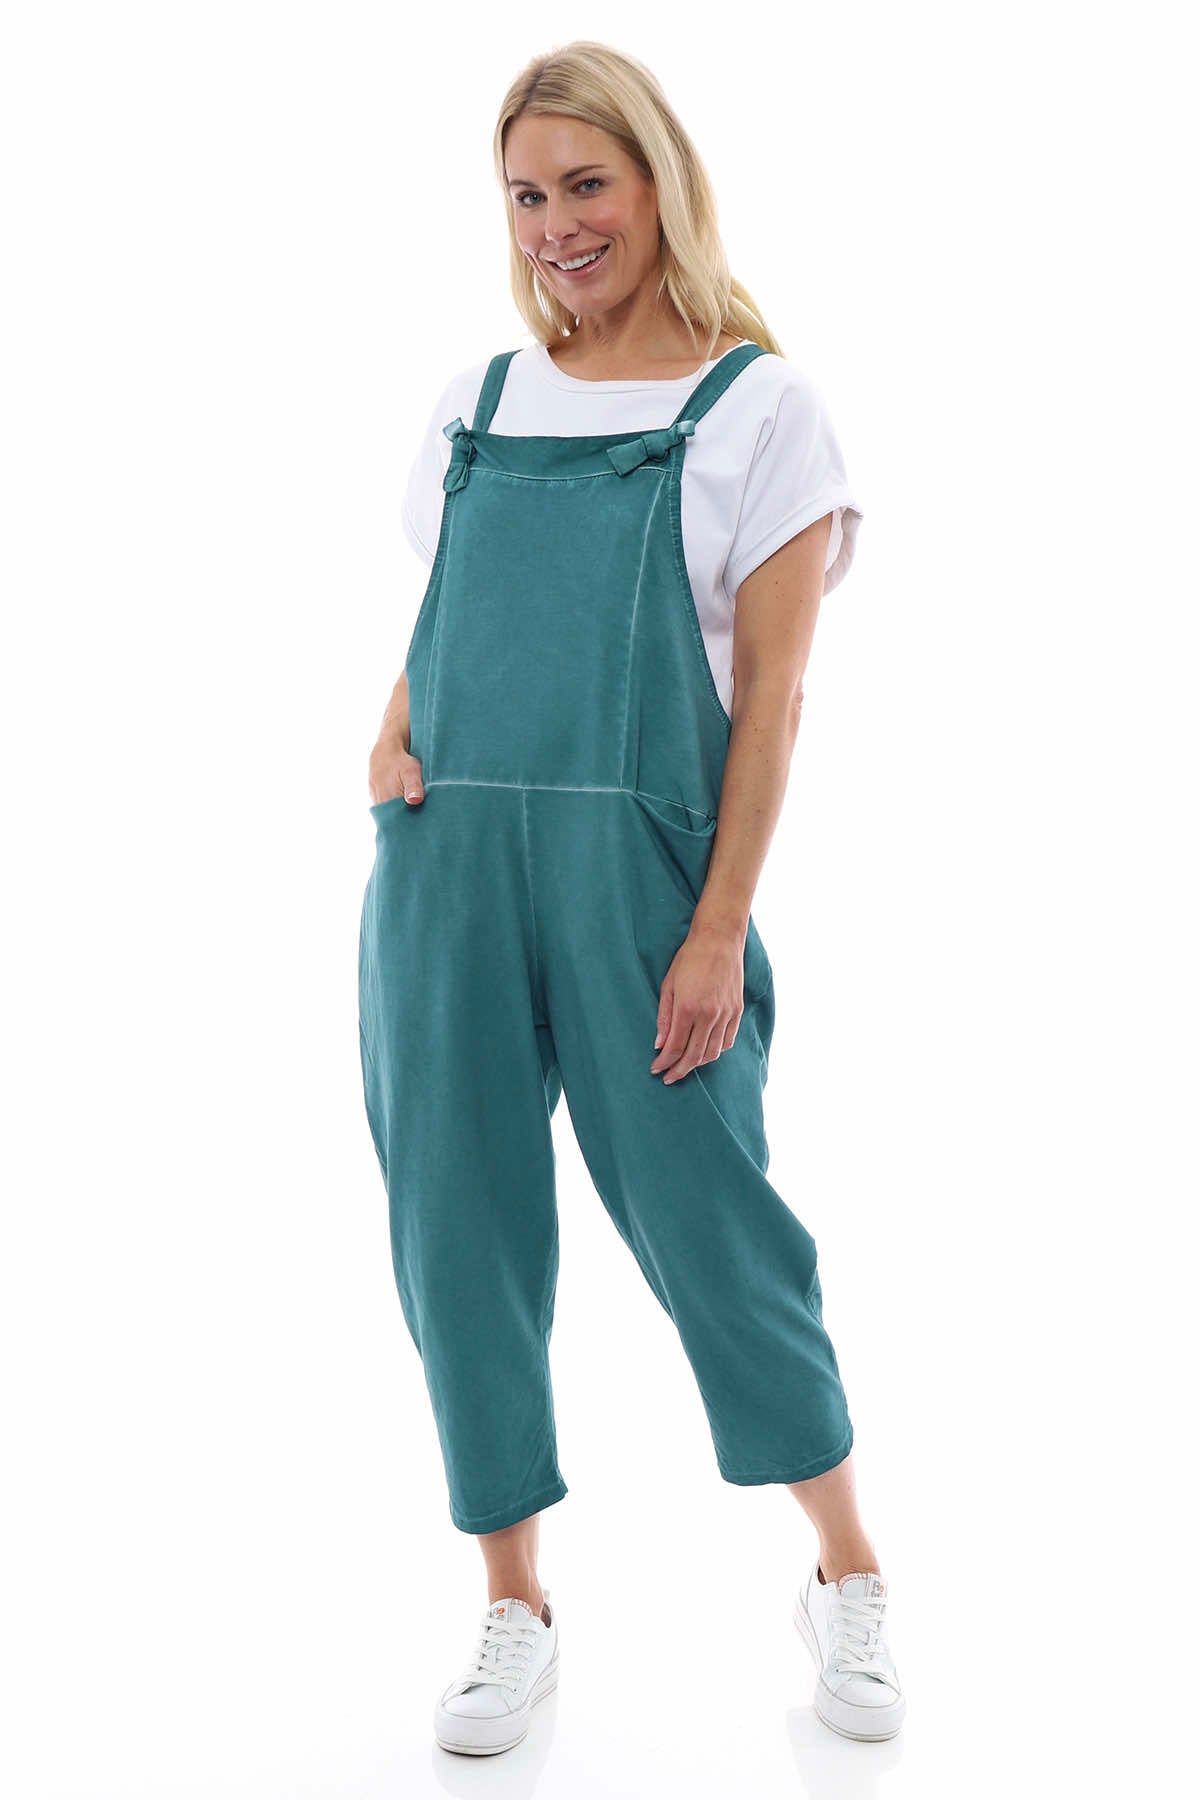 Pabo Washed Cotton Dungarees Teal